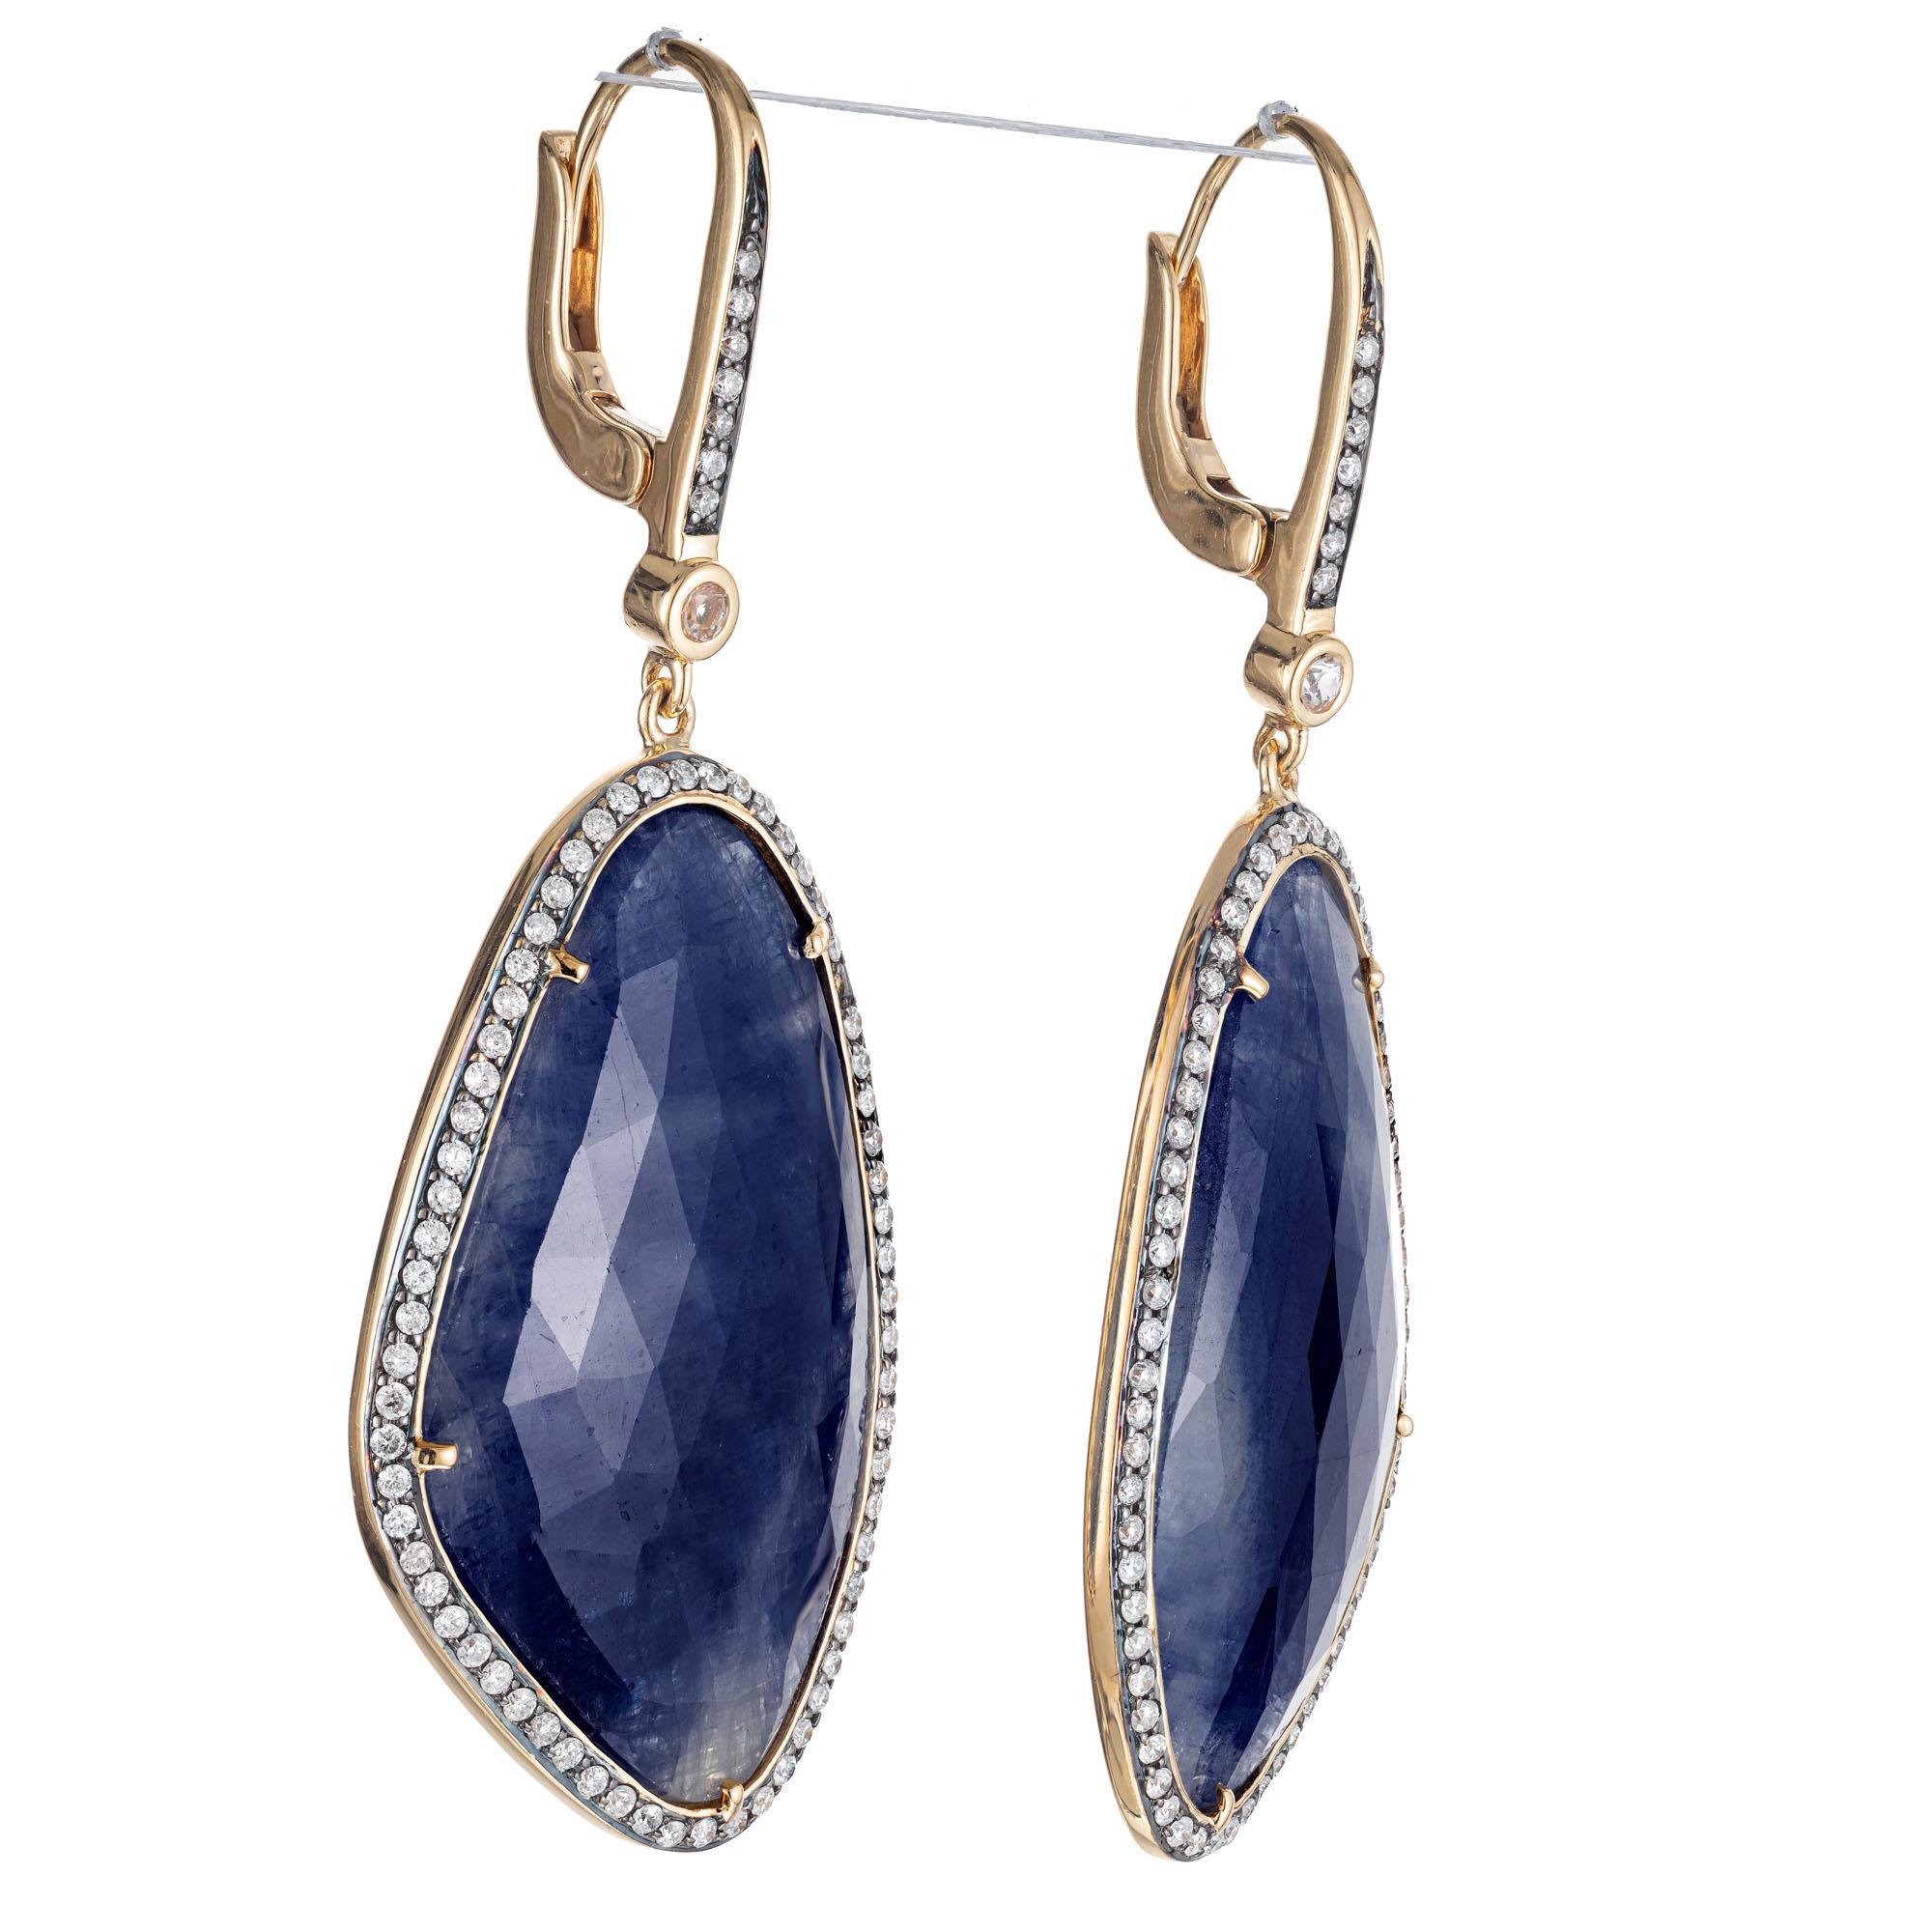  Designer JMP sapphire and diamond dangle earrings. 2 custom cut 16.00ct sapphire slices set in 18k yellow gold with round diamond halos.  

2 custom cut Sapphires, approx. total weight 16.00cts, 31.43 x 17.81 x 4.37mm
144 round diamonds, approx.